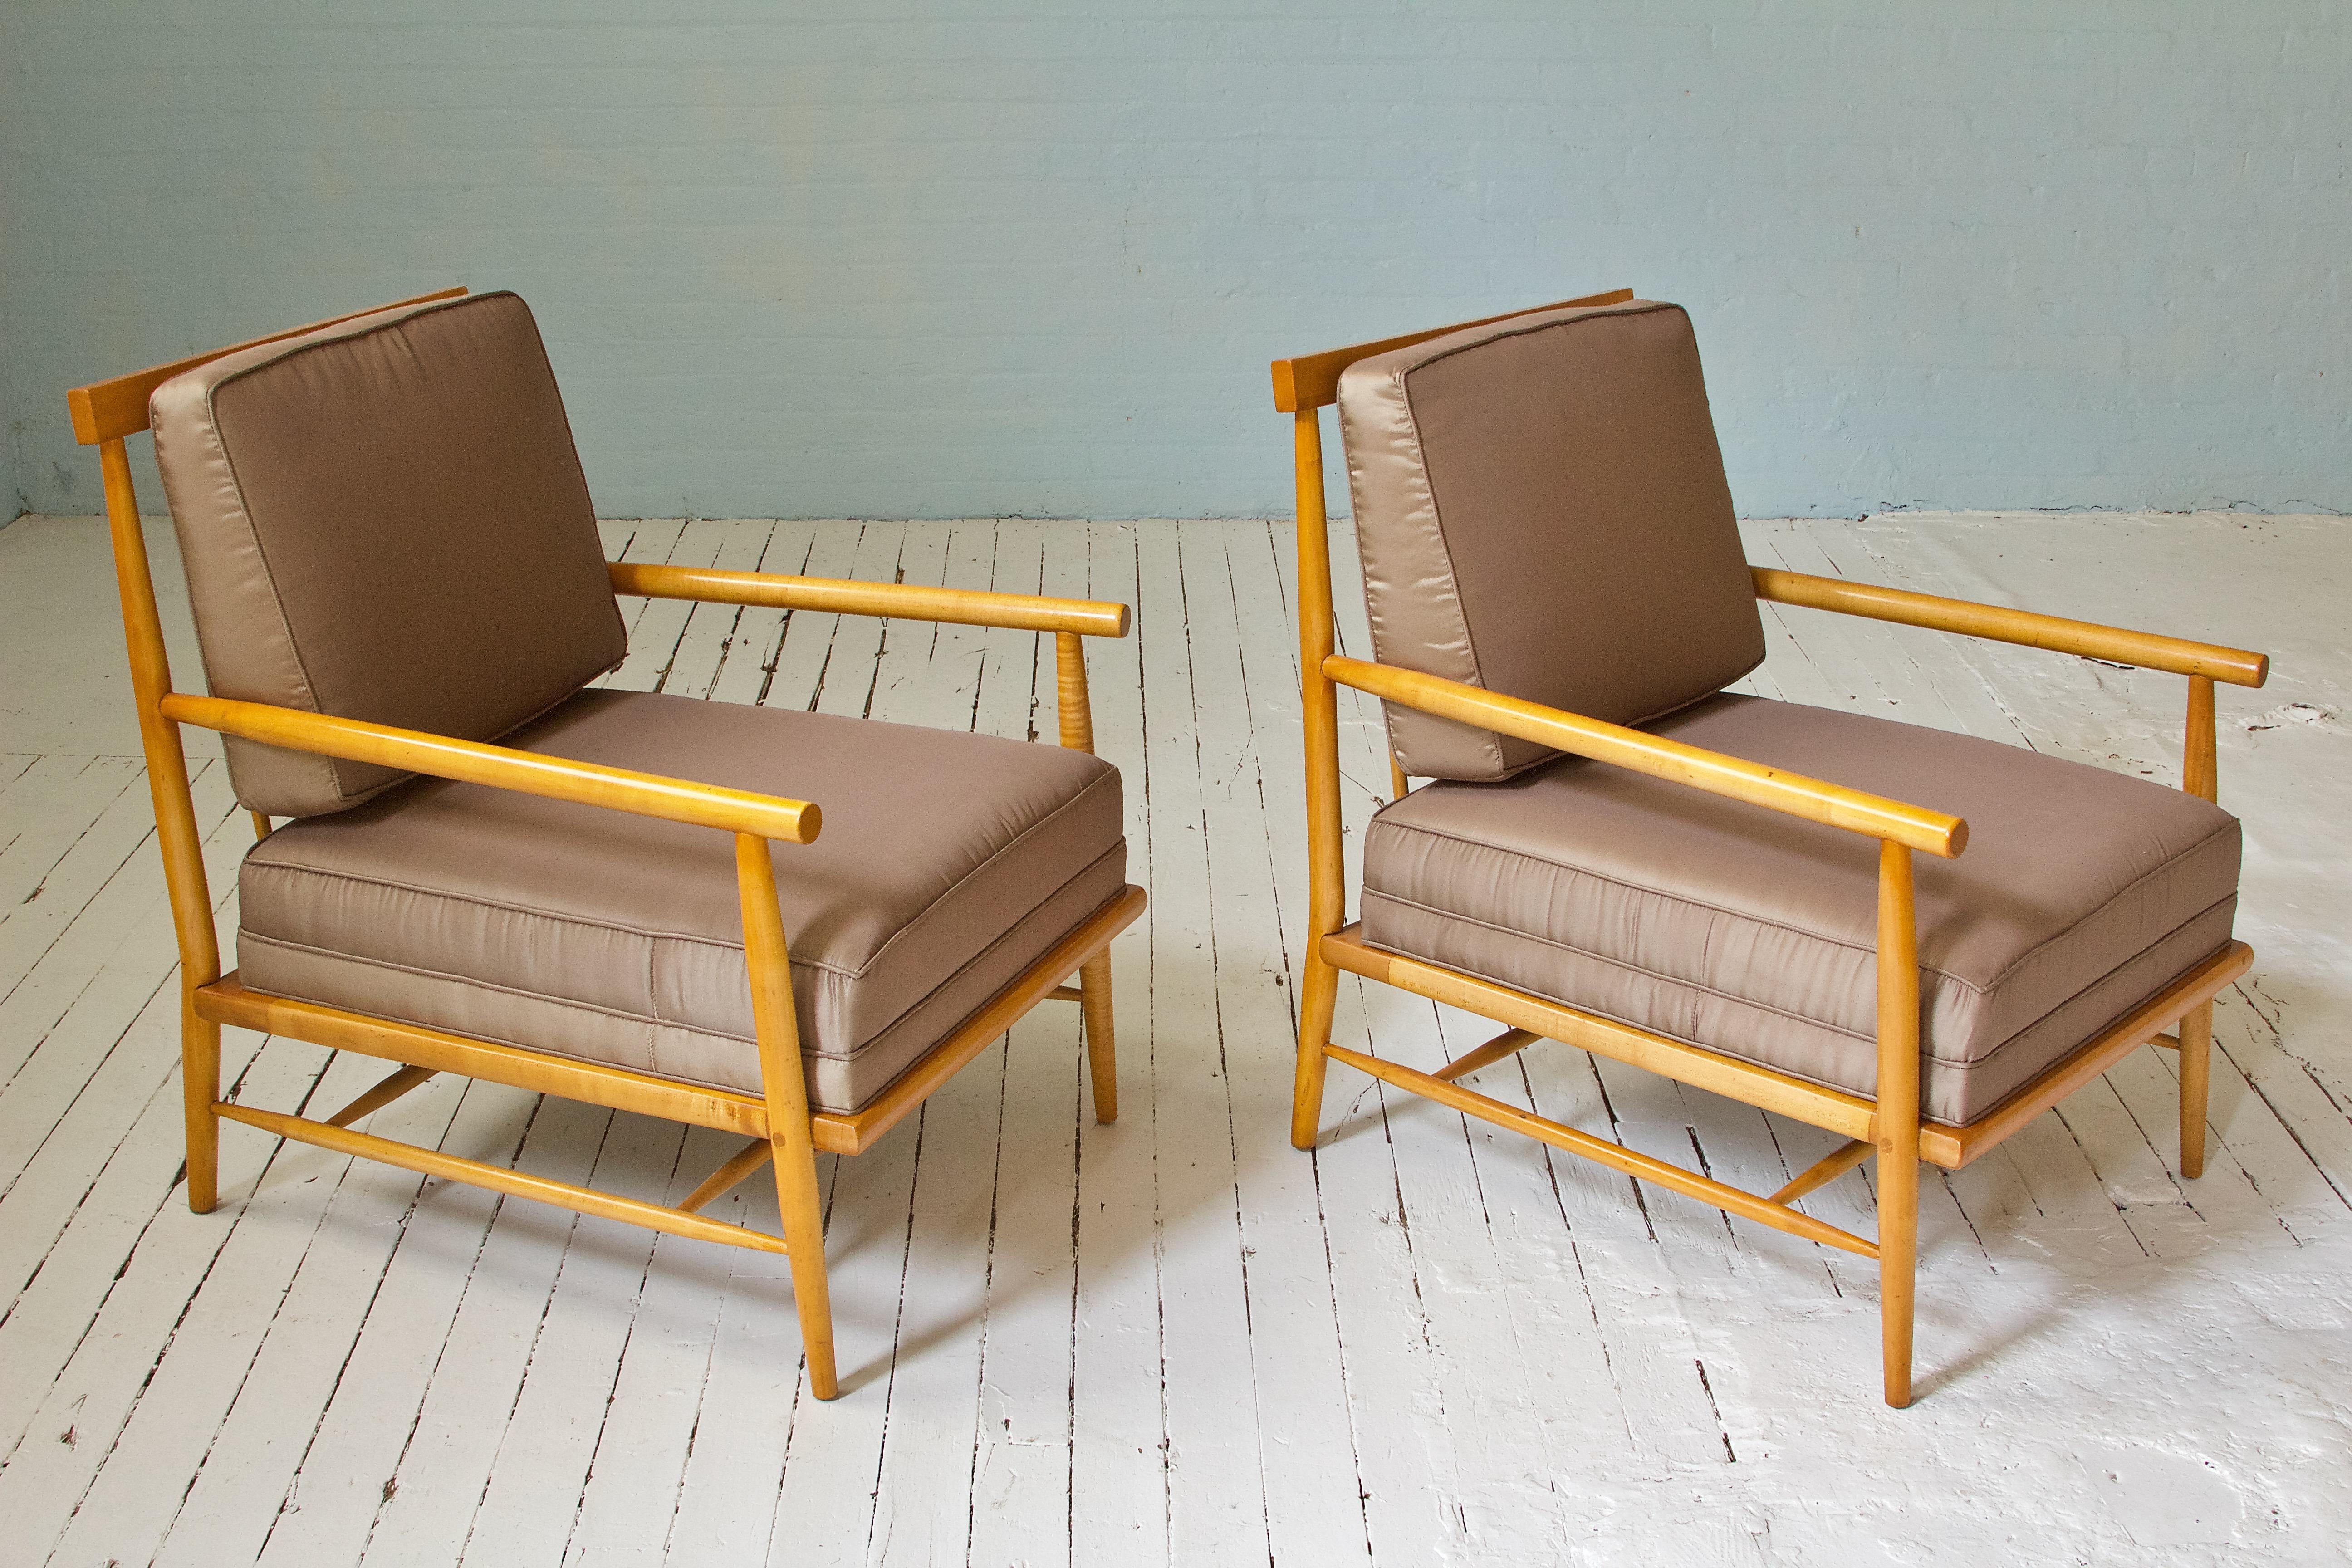 Great pair of rare lounge chairs designed by an American titan of 20th century furniture design--Paul McCobb. This pair--in turned figured maple--was produced by O'Hearn in Gardner, Mass. as part of McCobb's very successful 